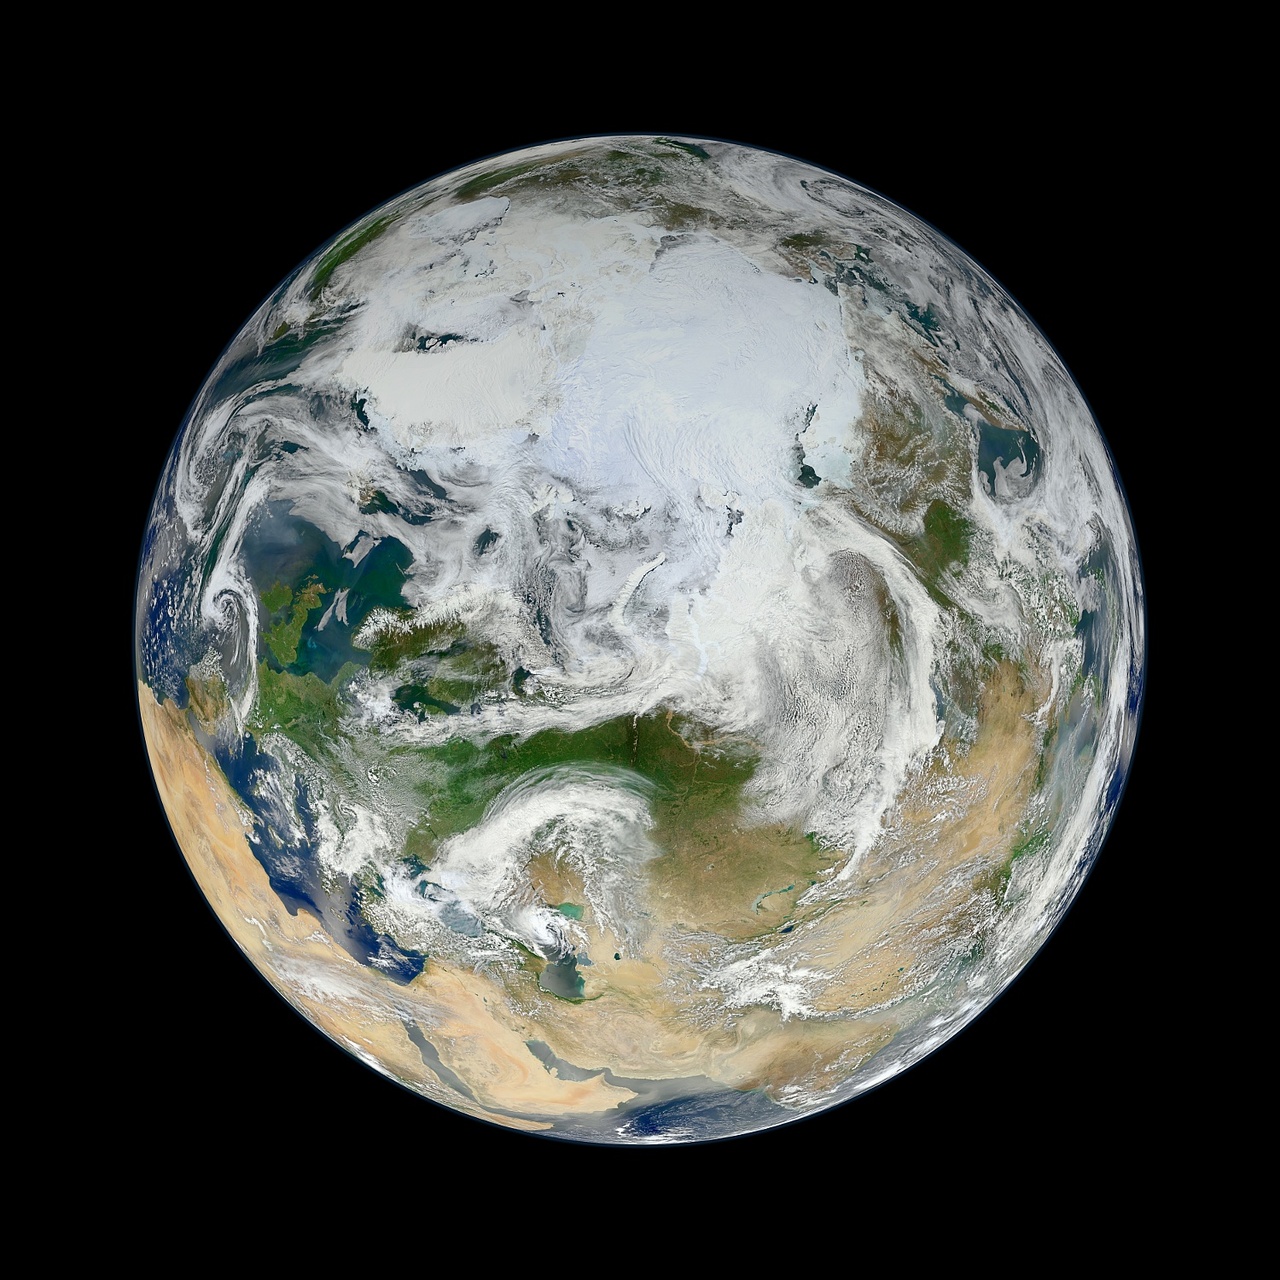 Image description:
From NASA&#8217;s Earth Observatory:
There have been many images of the full disc of Earth from space – a view often referred to as “the Blue Marble” – but few have looked quite like this. Using natural-color images from the Visible/Infrared Imaging Radiometer Suite (VIIRS) on the recently launched Suomi-NPP satellite, a NASA scientist has compiled a new view showing the Arctic and high latitudes.